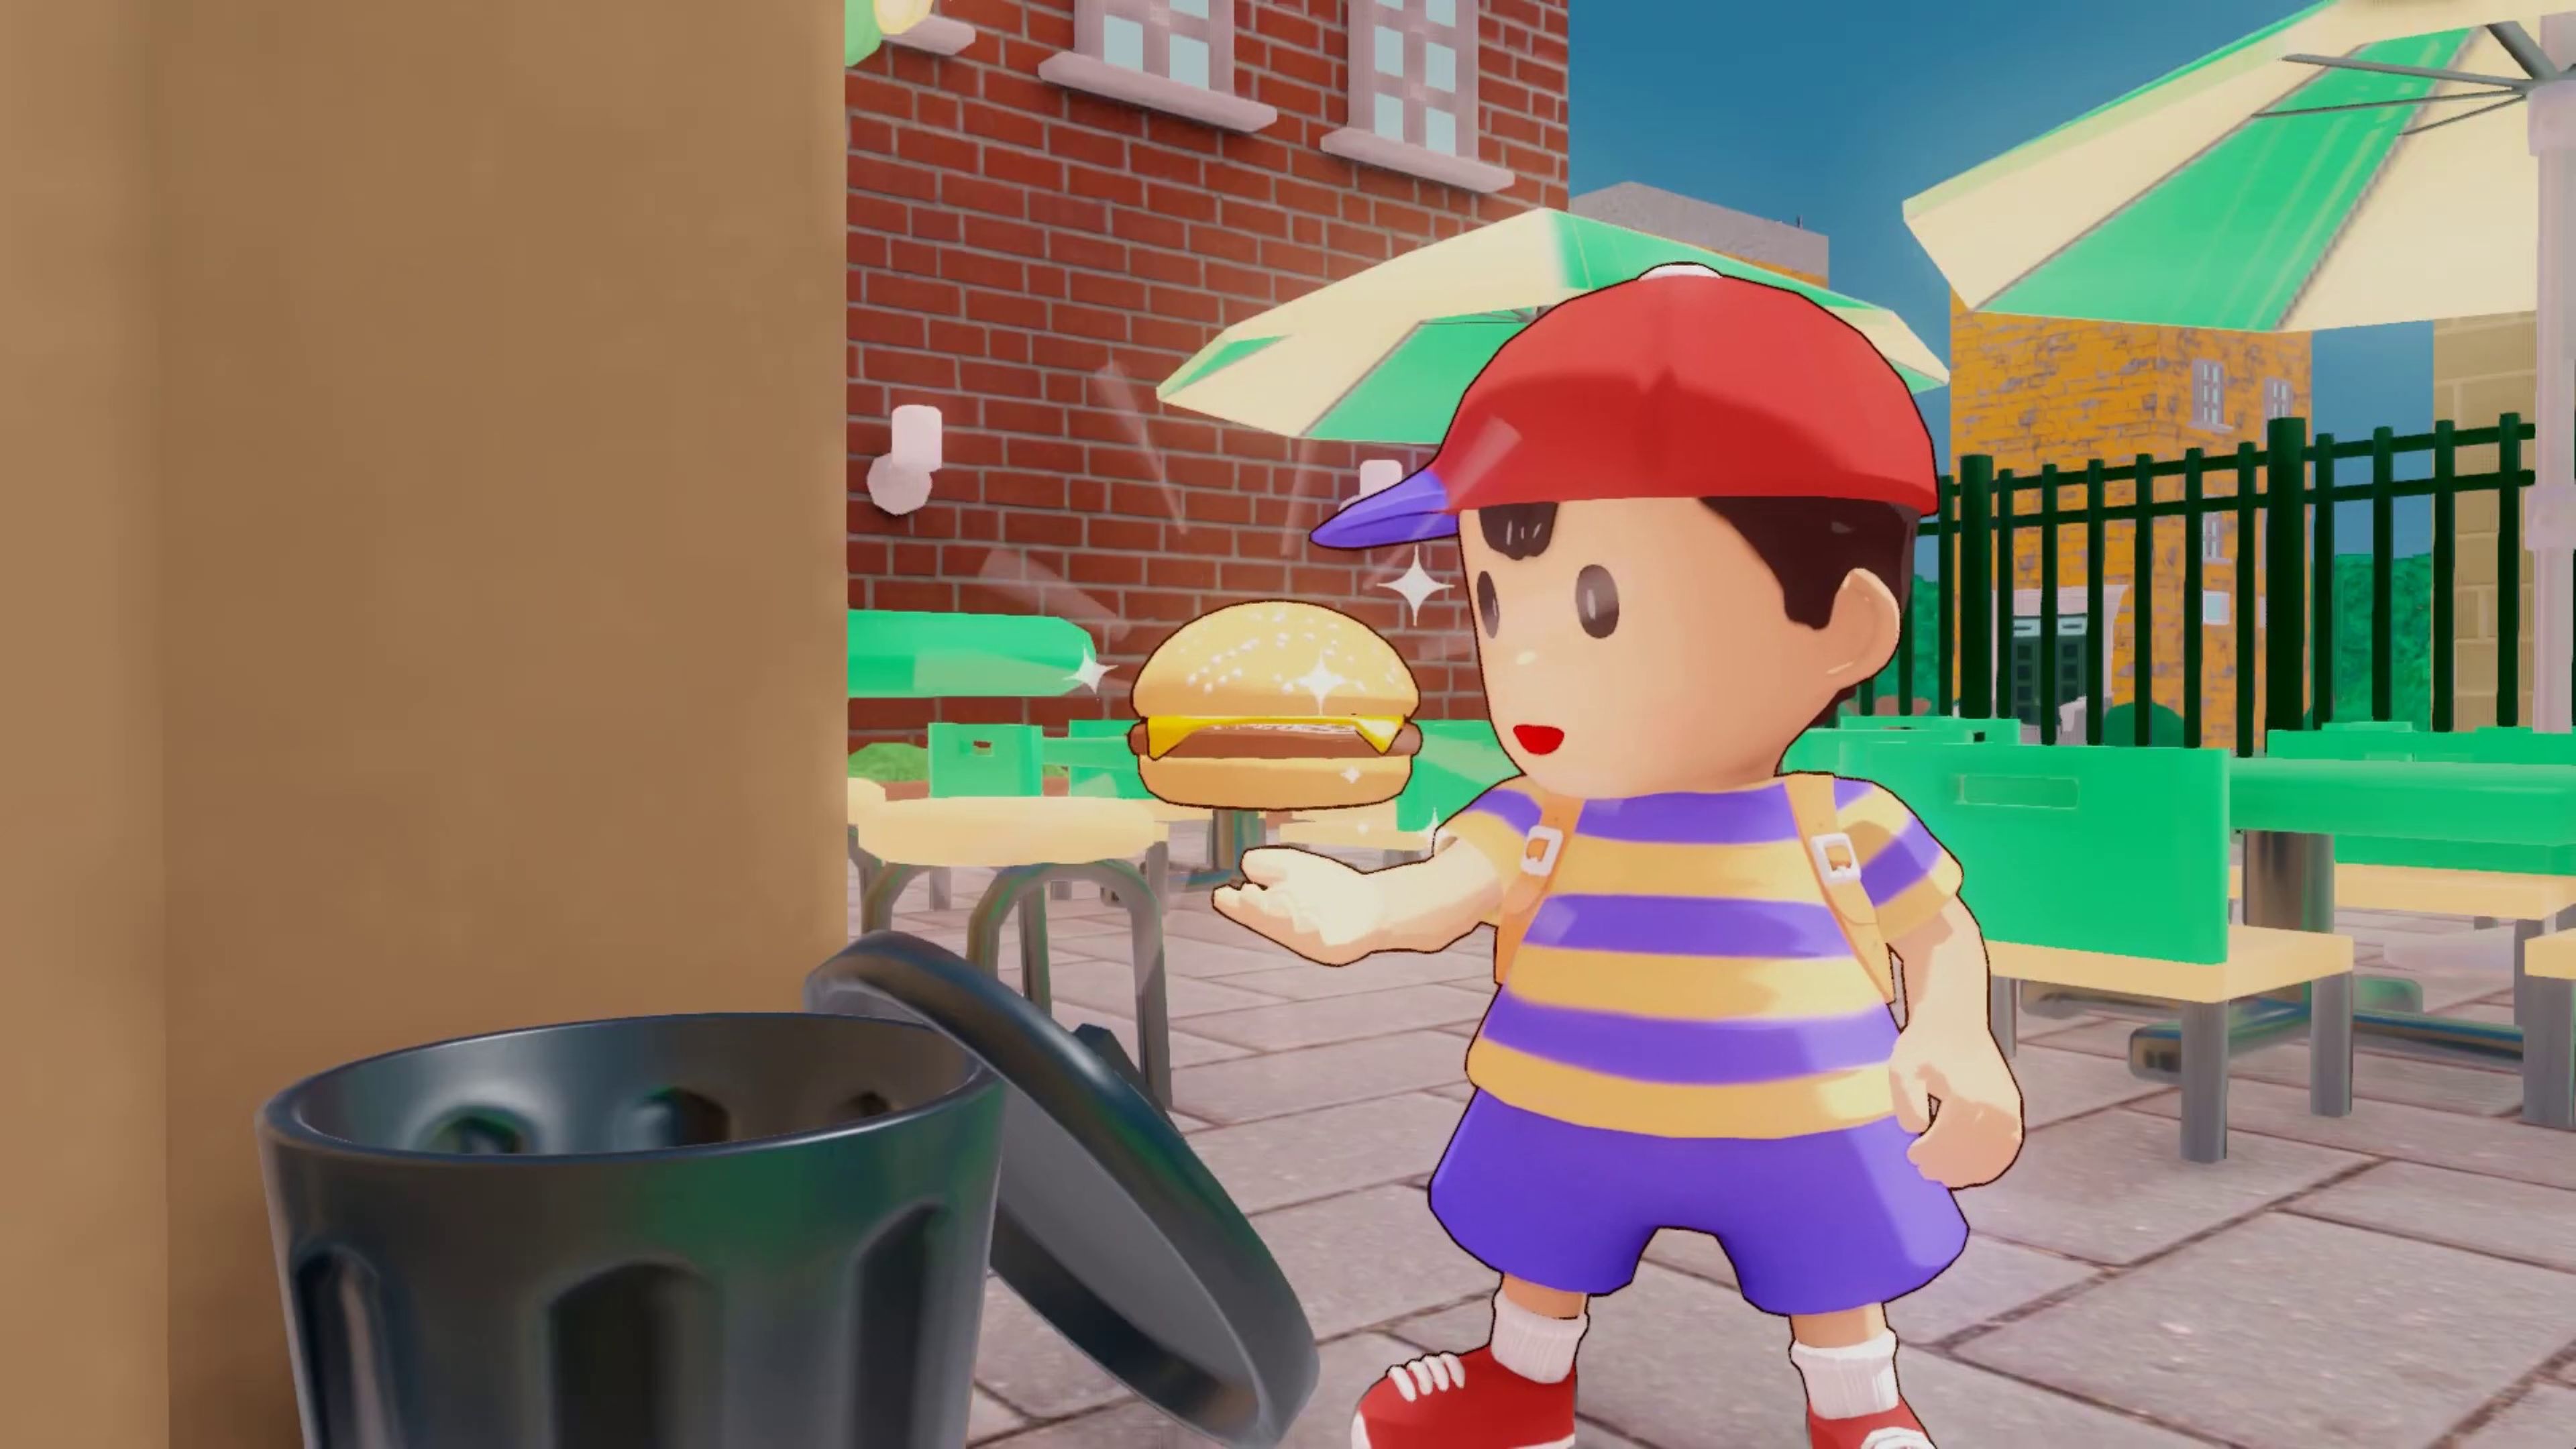 Earthbound Dimensions